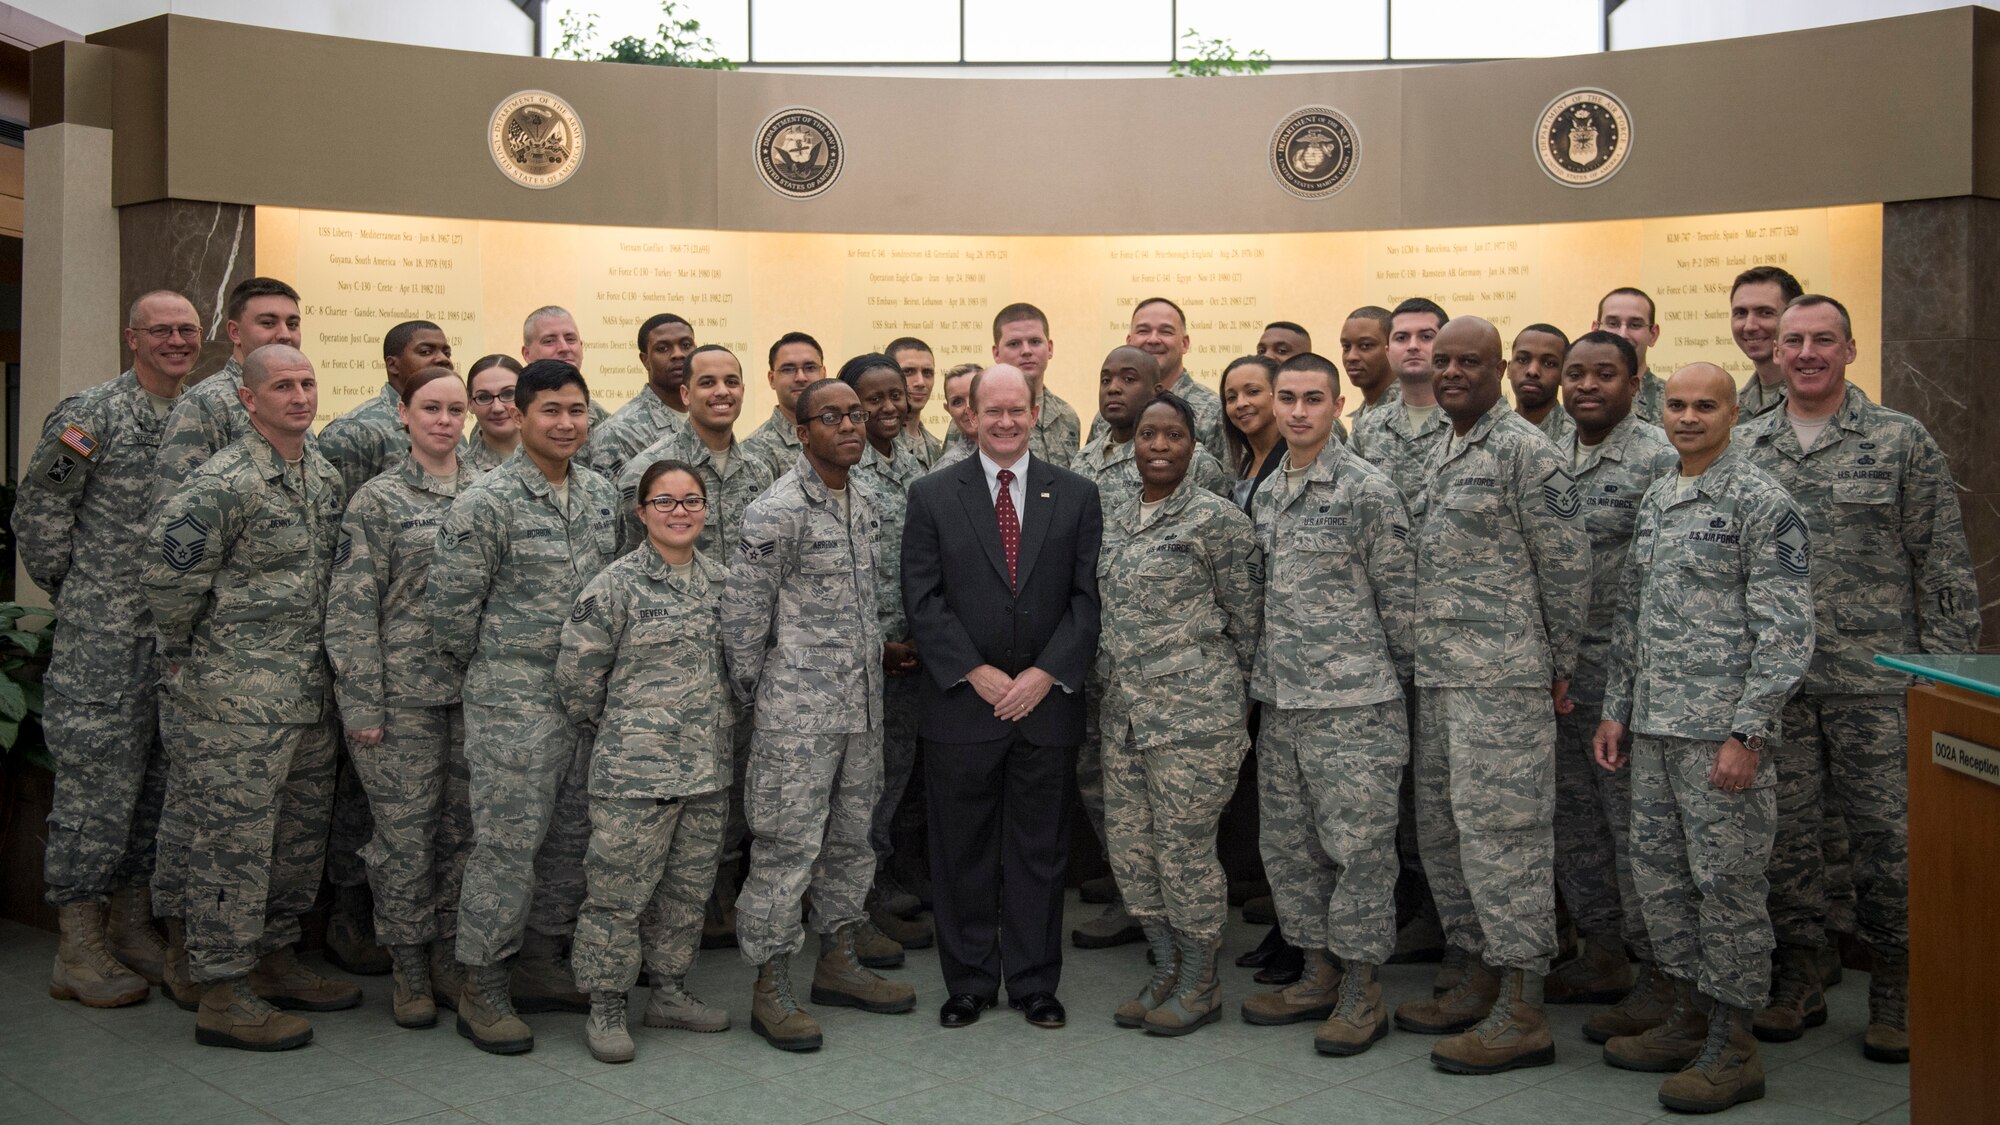 Sen. Chris Coons of Delaware poses for a group photo with Airmen from Air Force Mortuary Affairs Operations Feb. 9, 2015, during a visit to Dover Air Force Base, Del. The senator and his staff met with Airmen to learn more about operations at the Department of Defense’s sole port mortuary. (U.S. Air Force photo by Capt. Ray Geoffroy)